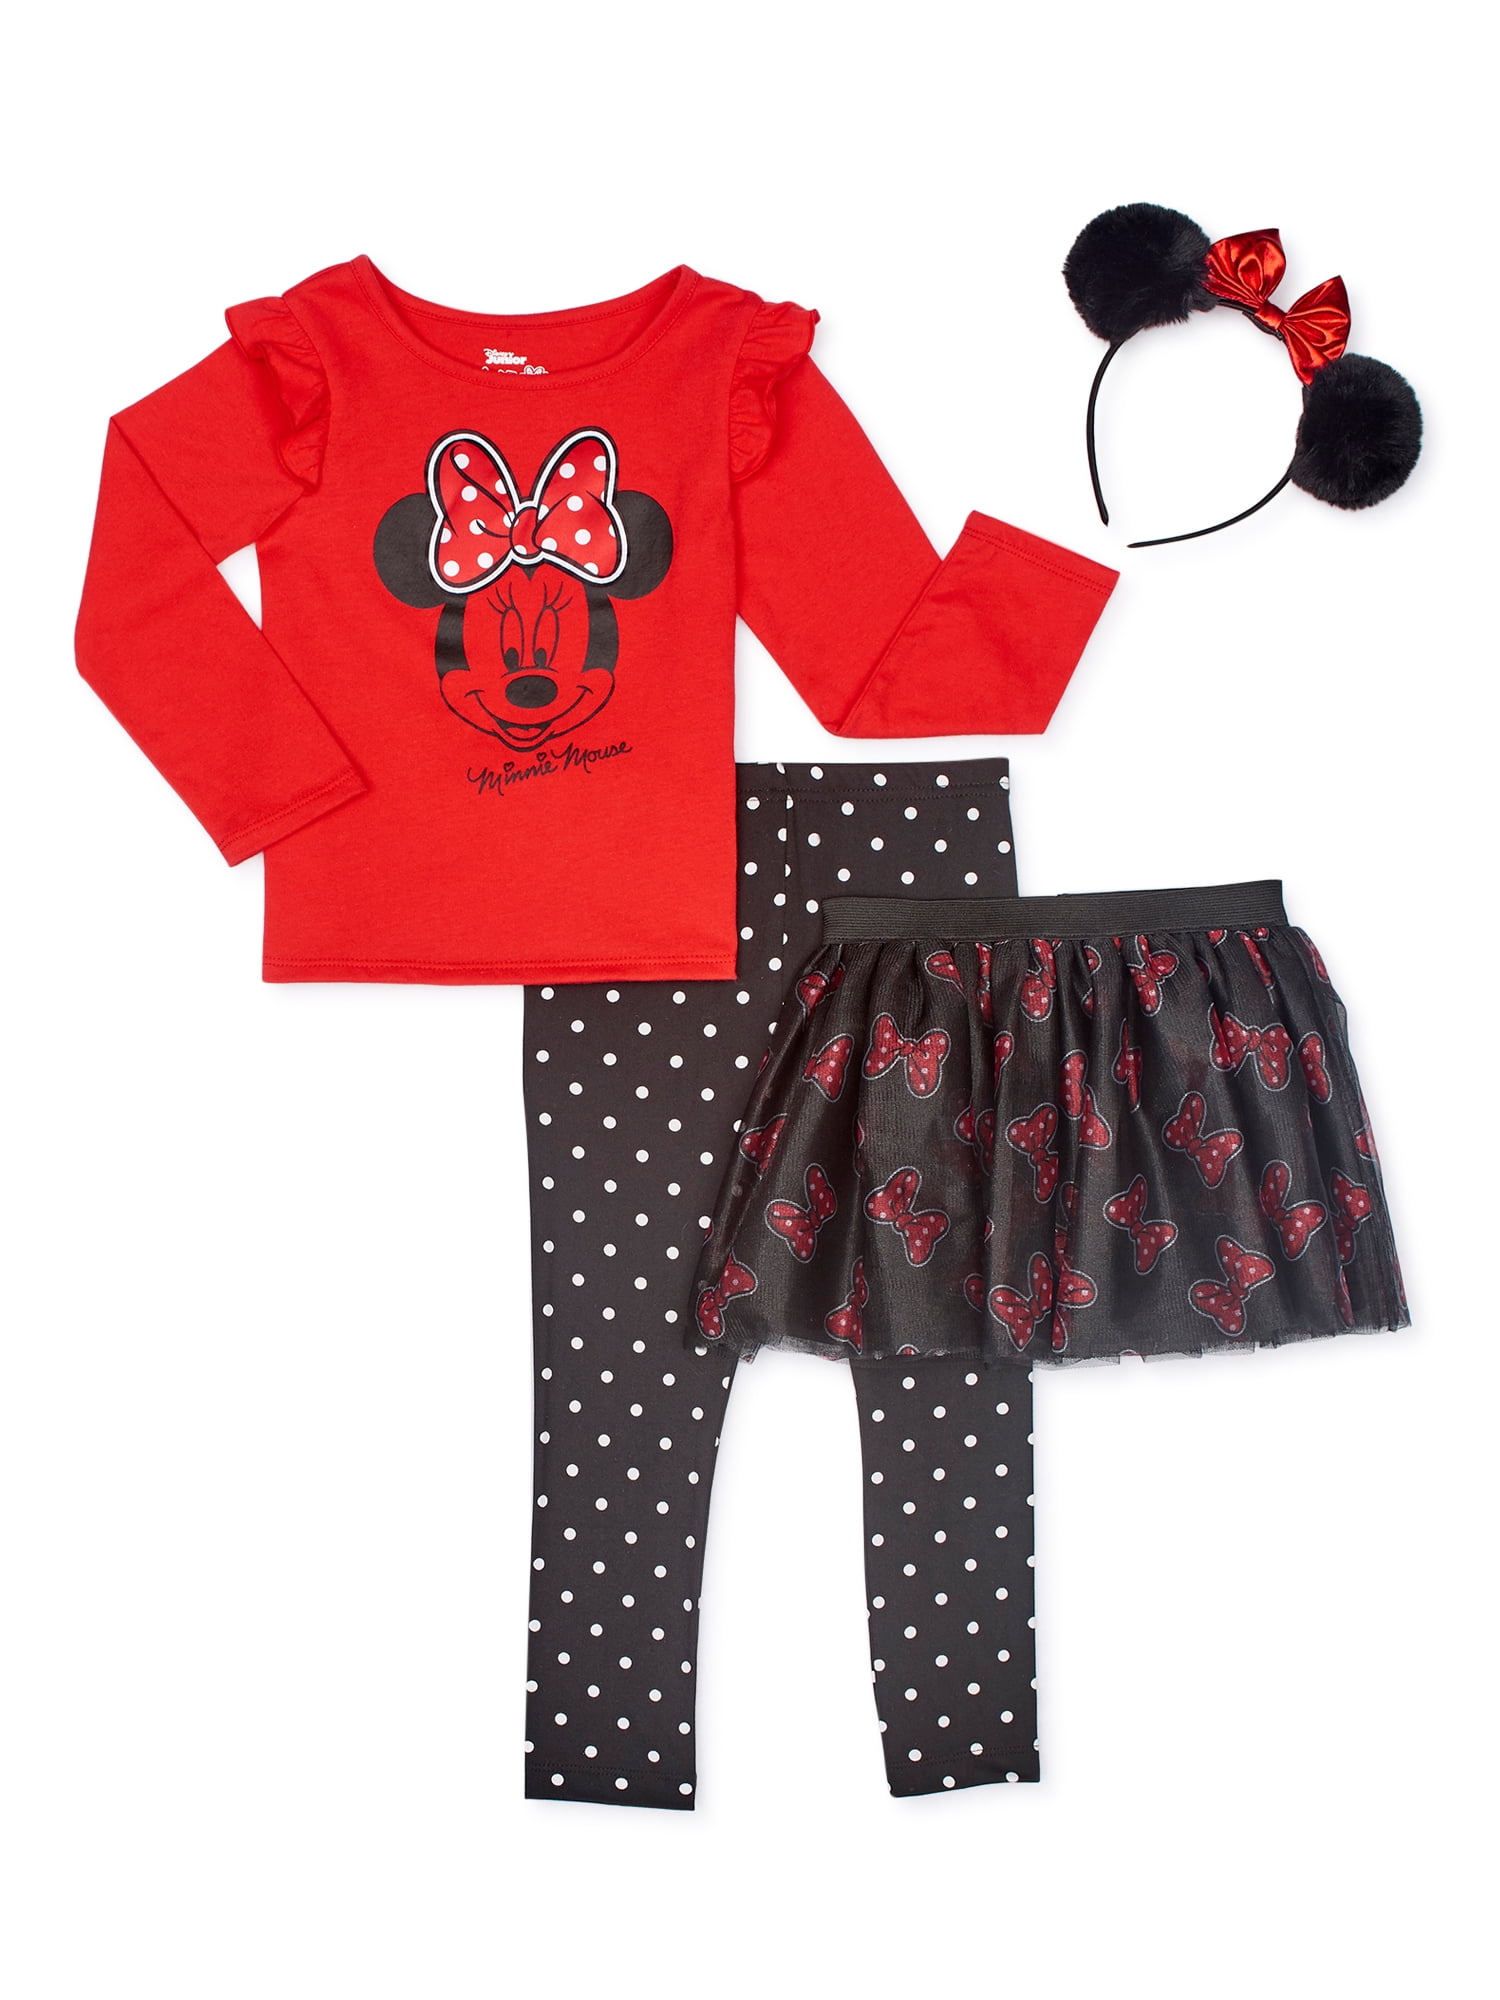 WarnerBros Minnie Mouse Girls T-Shirt Hoodie Activewear Zip up 2 PC Outfit Set Sizes 3T-7